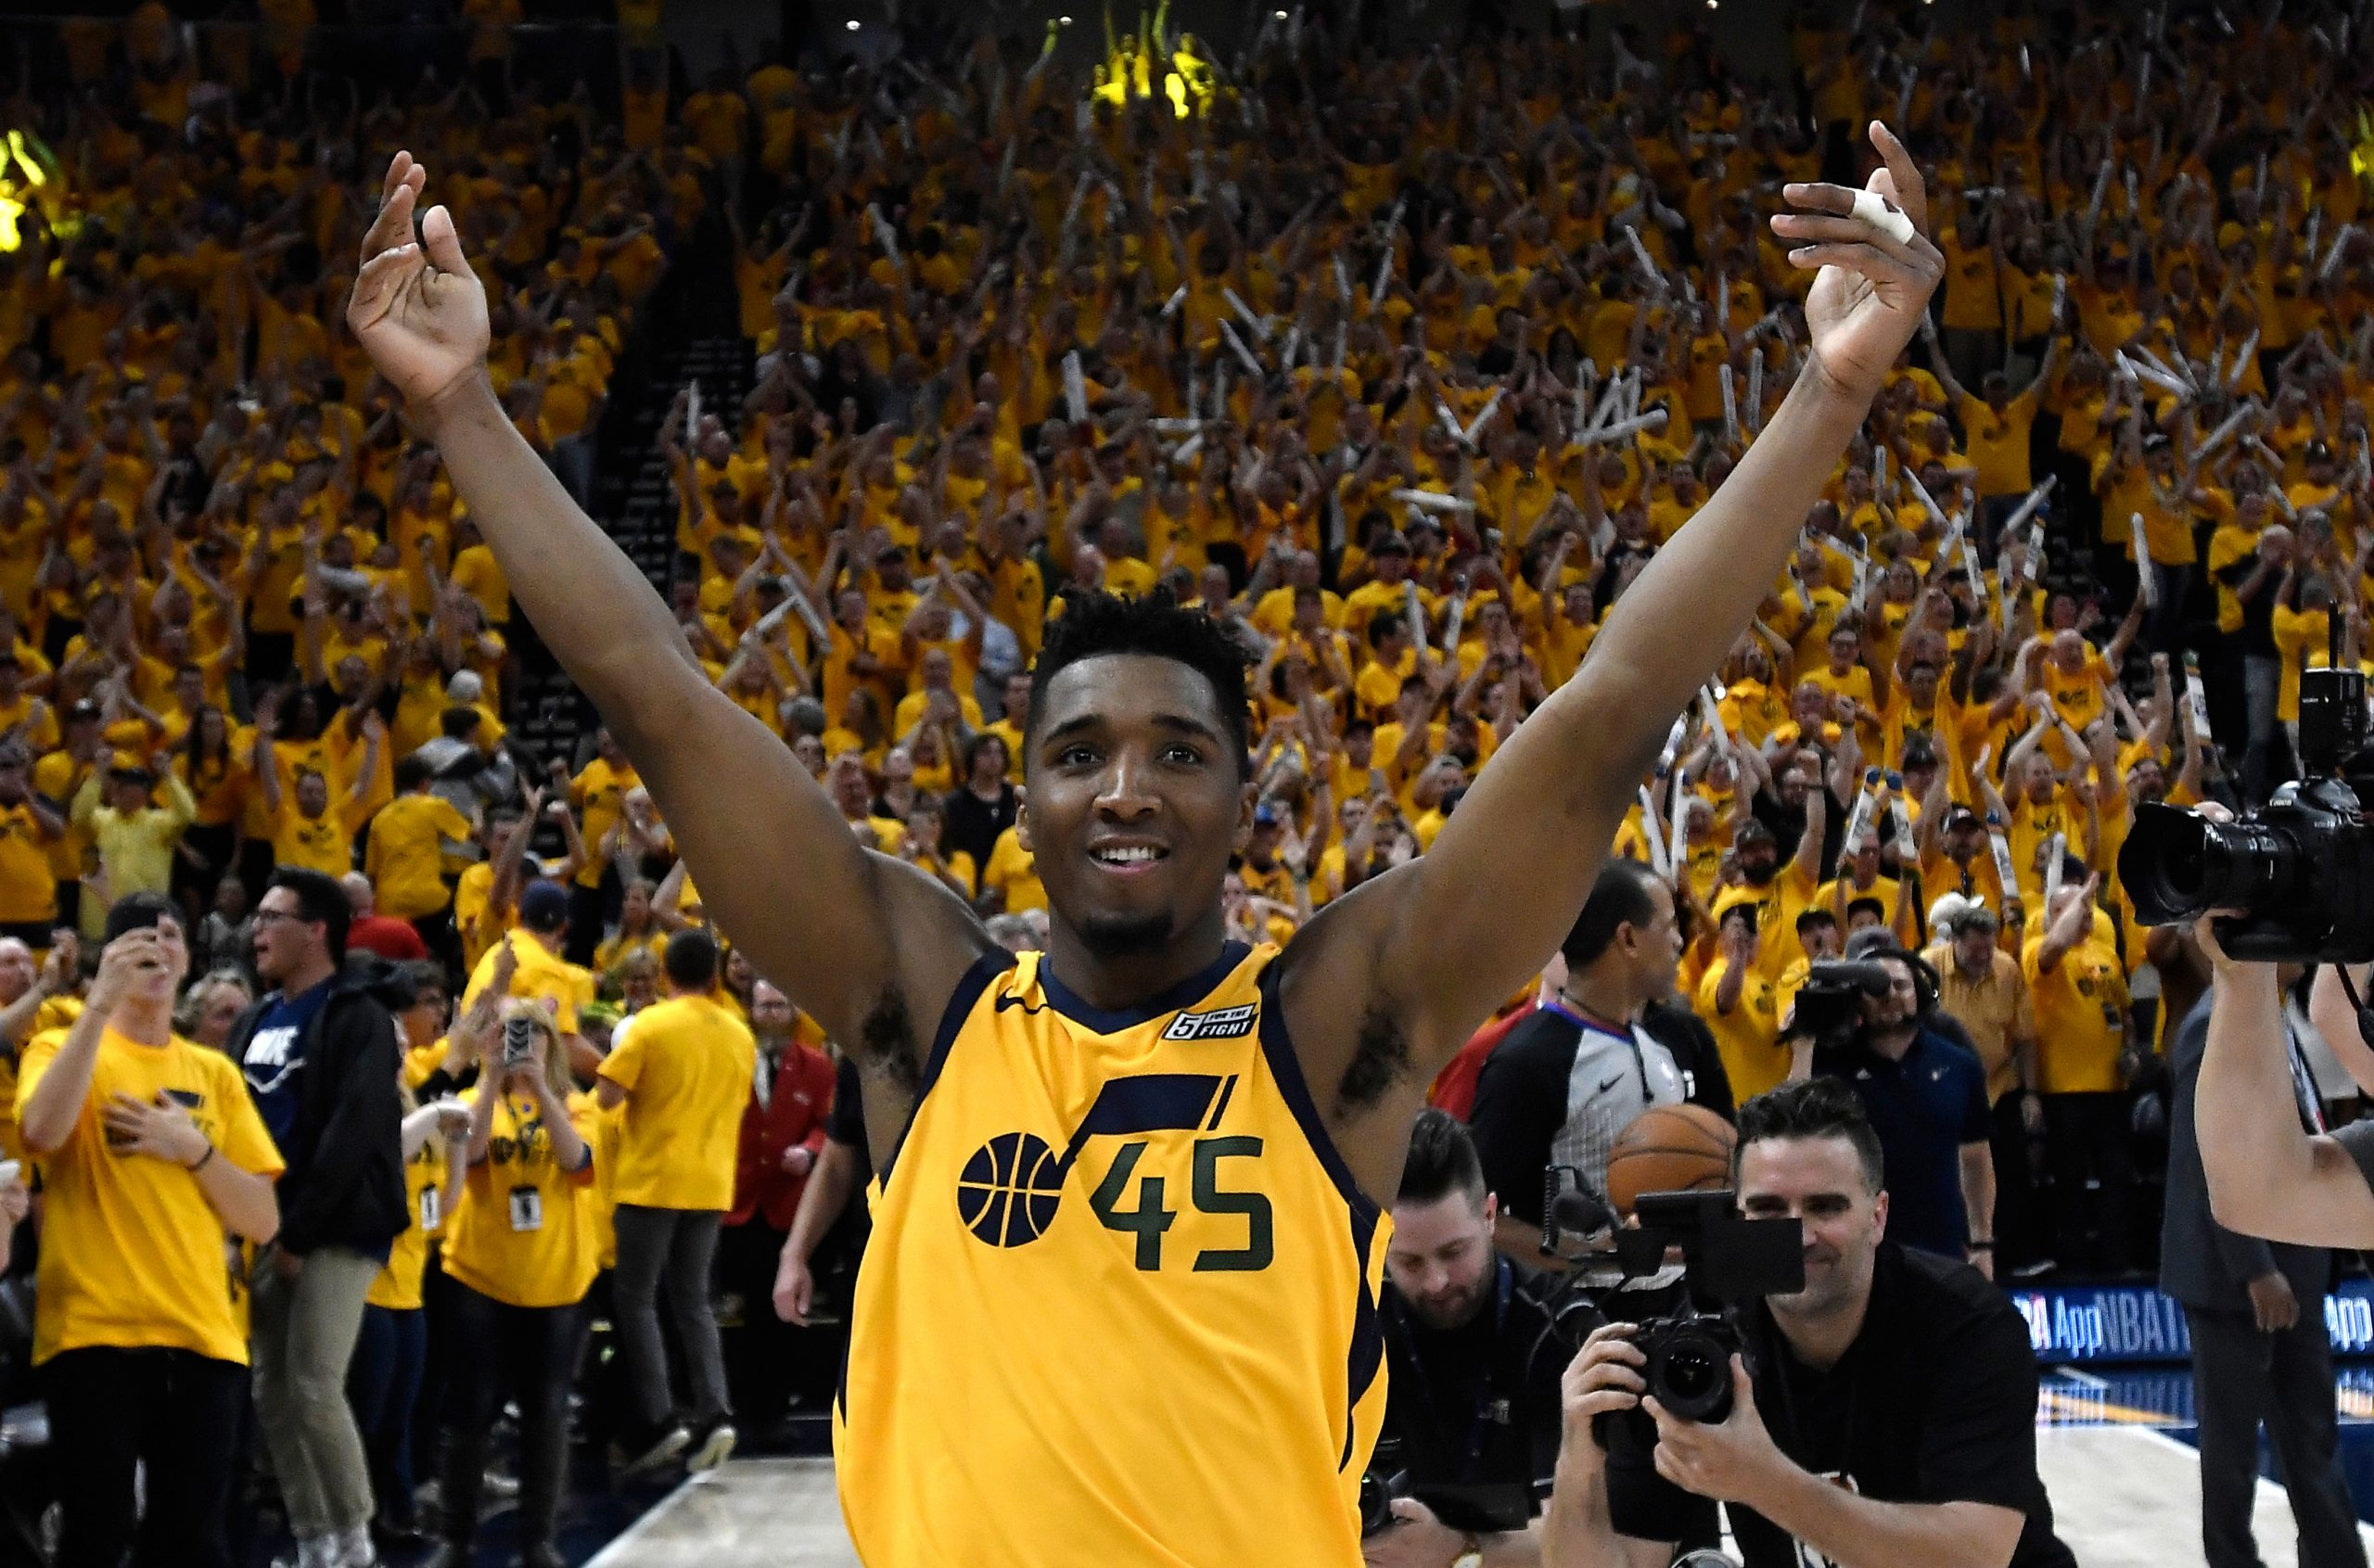  Donovan Mitchell Is A MVP Candidate If Jazz Have League’s Best Record, Says Shawn Marion 